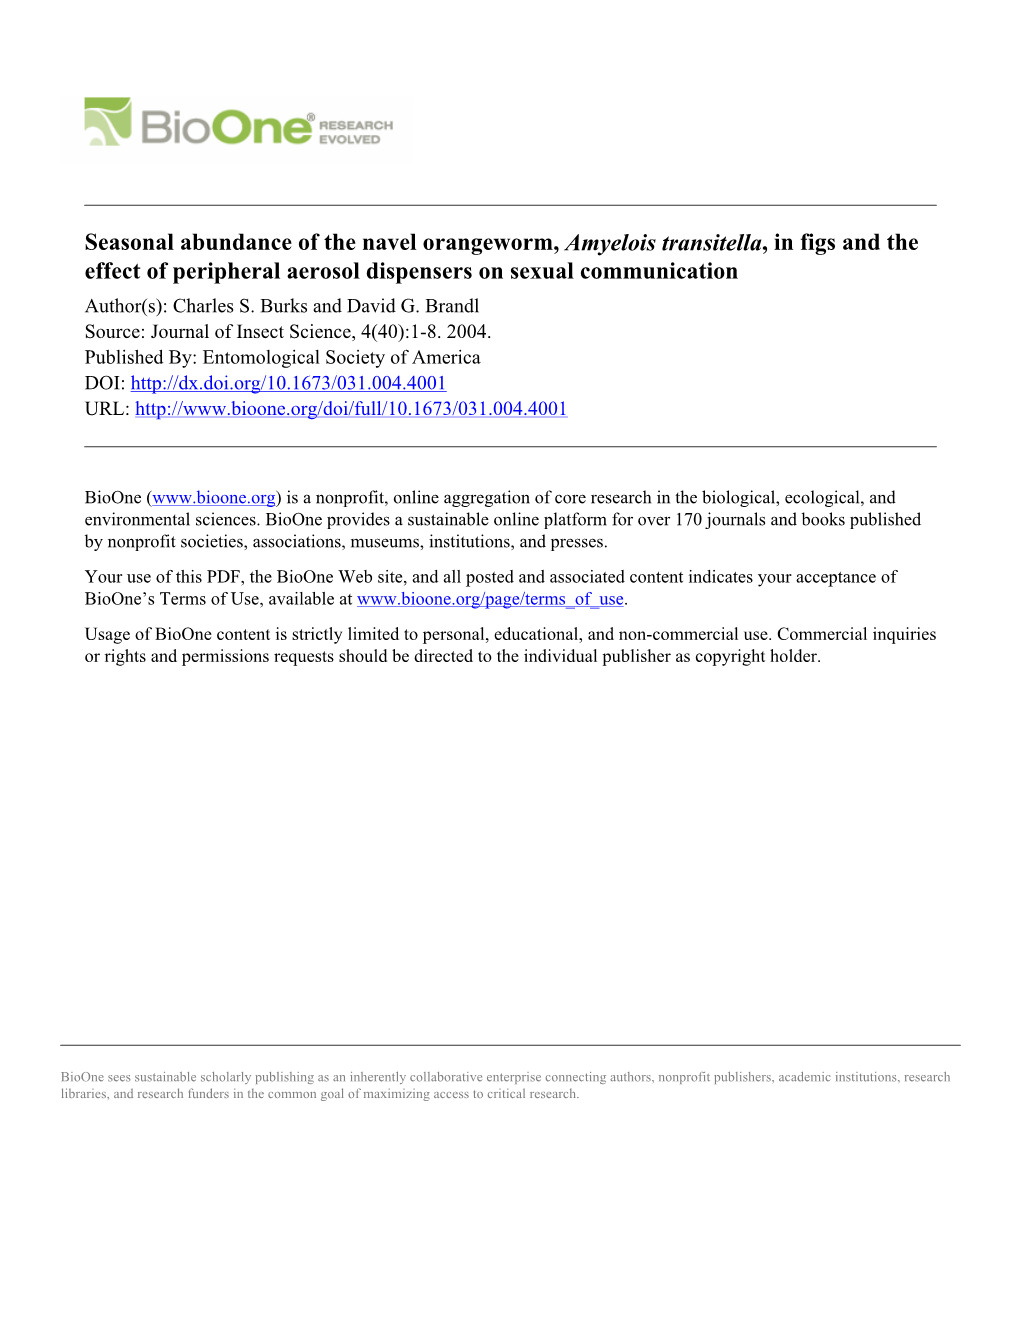 Seasonal Abundance of the Navel Orangeworm, Amyelois Transitella, in Figs and the Effect of Peripheral Aerosol Dispensers on Sexual Communication Author(S): Charles S